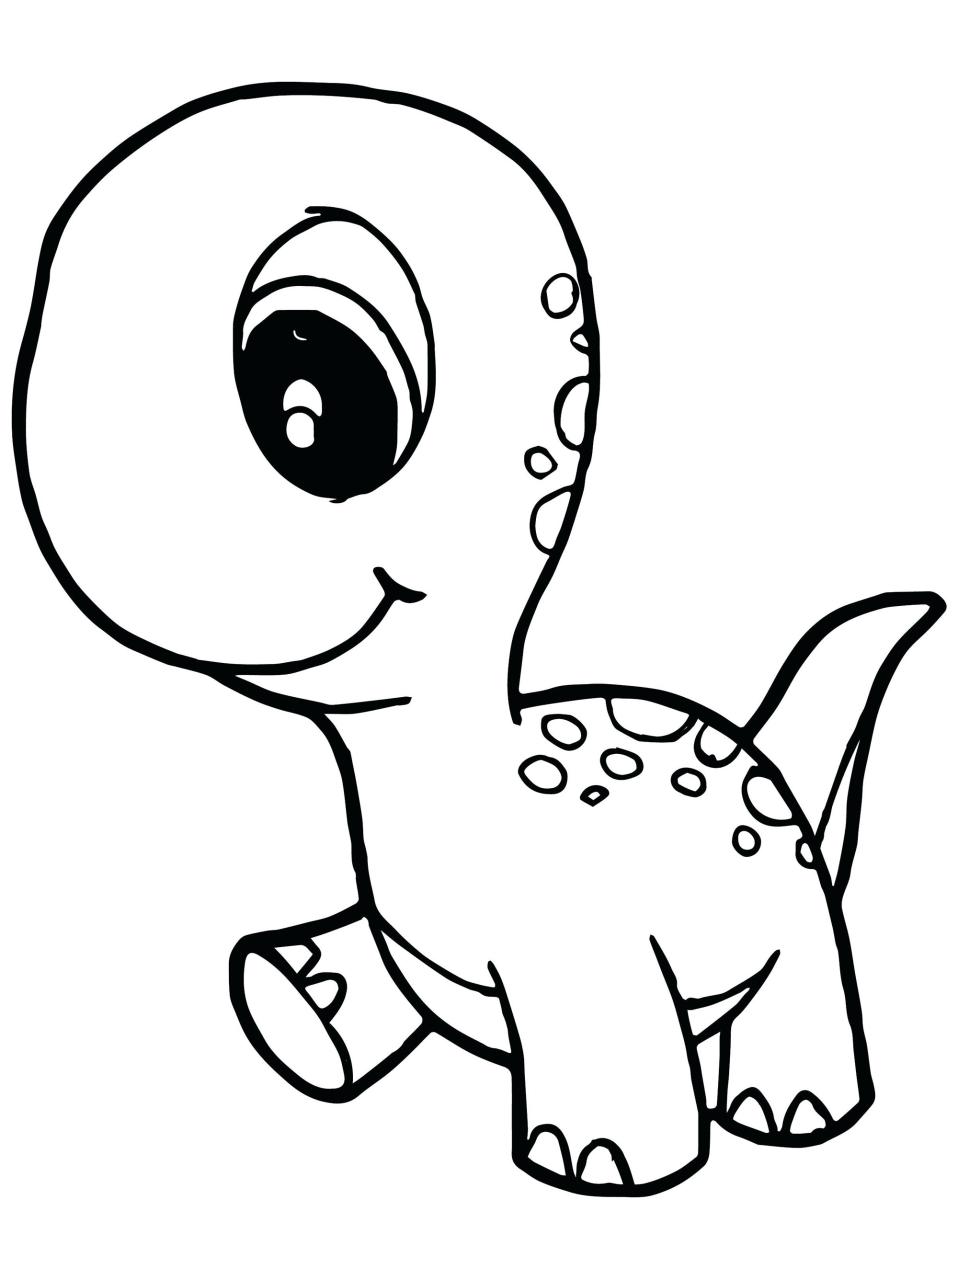 List Of Simple Dinosaur Coloring Pages References